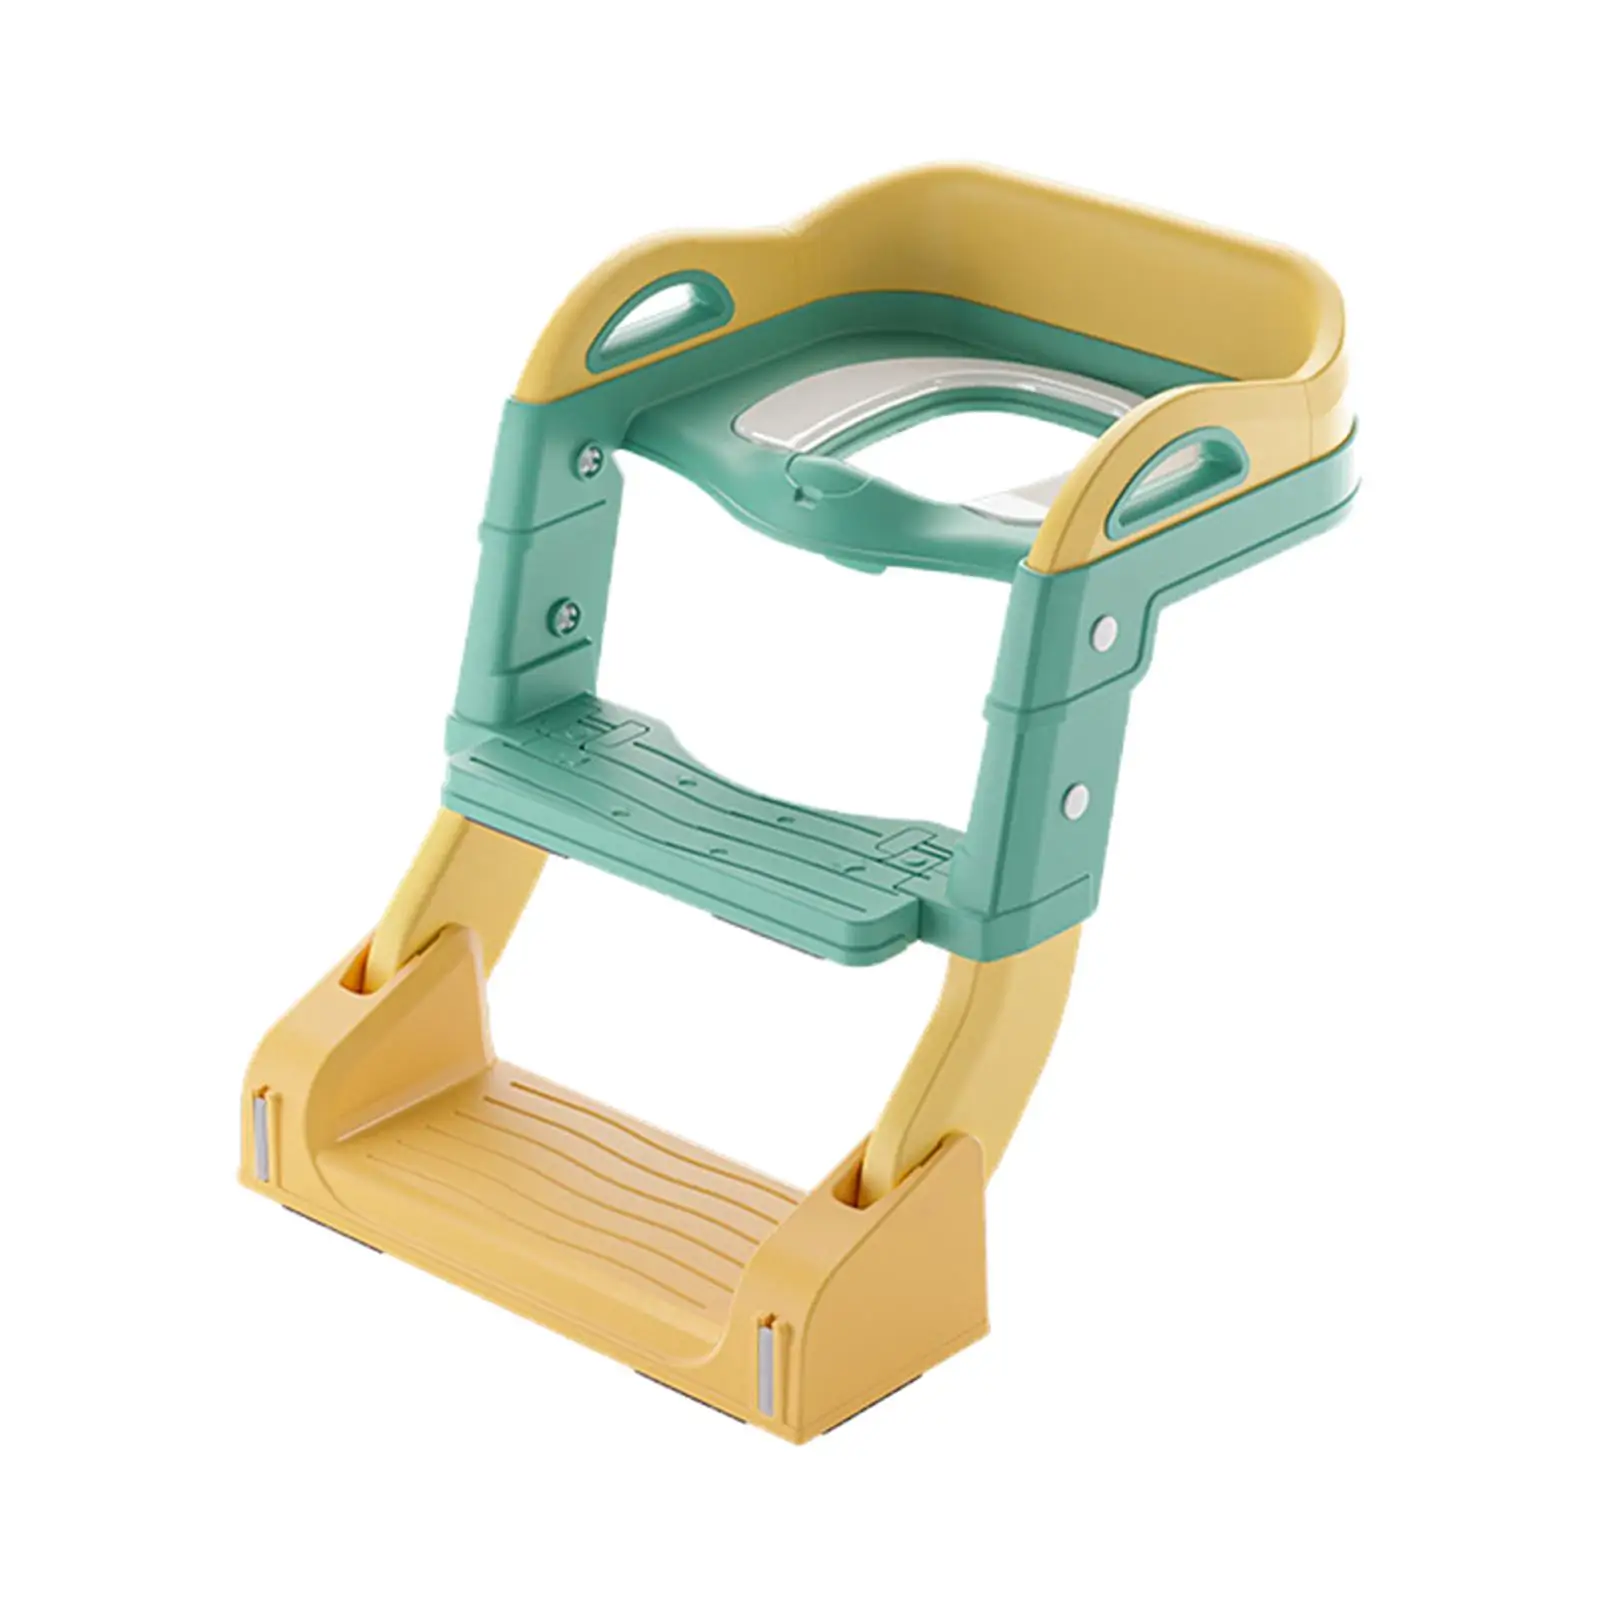 Kids Toilet Training Seat with Ladder Baby Infant Potty Removable and Washable Soft Seat Cushion Foldable Toilet Trainer Seat